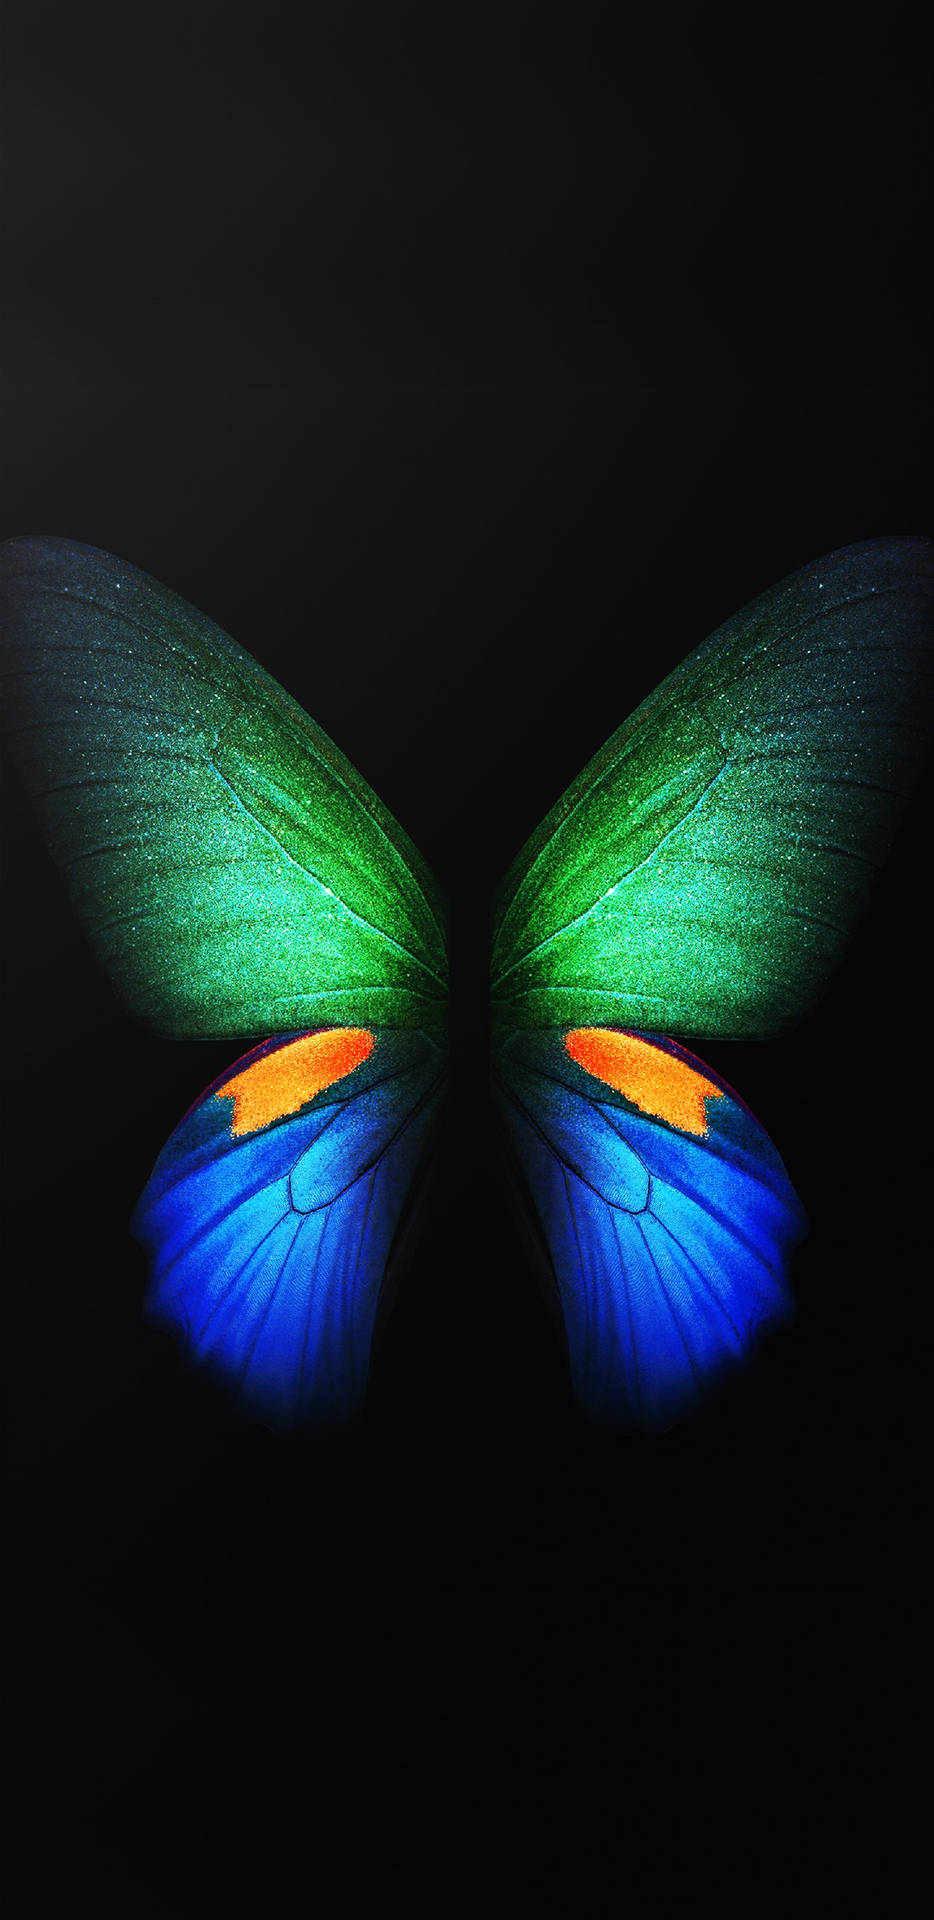 Samsung Galaxy S10 Plus powers creativity with its Butterfly Wings design Wallpaper